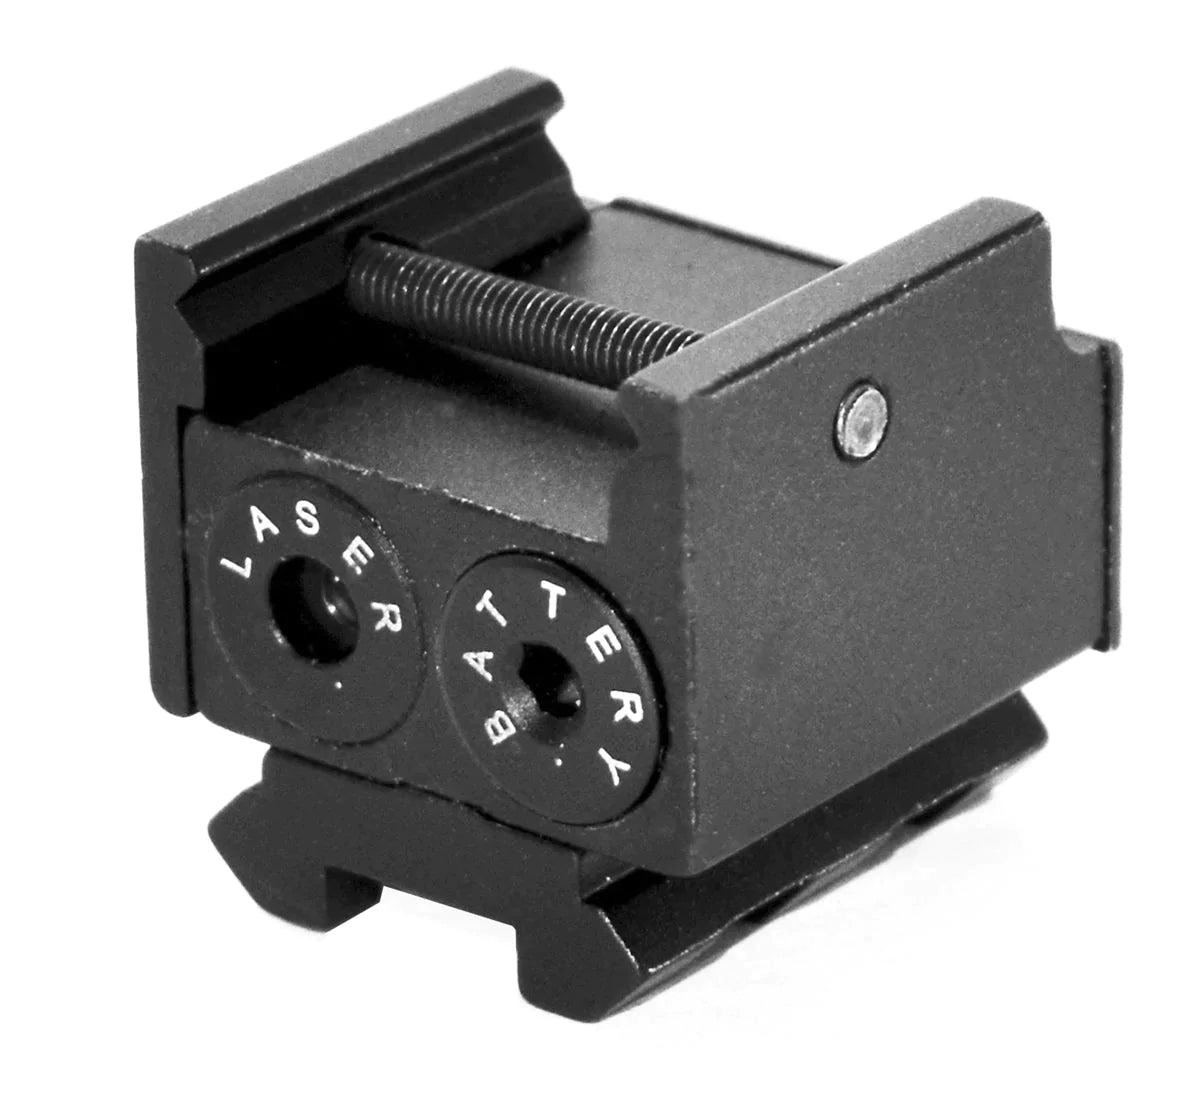 Trinity red dot sight for CZ P-10 C home defense accessories hunting tactical.